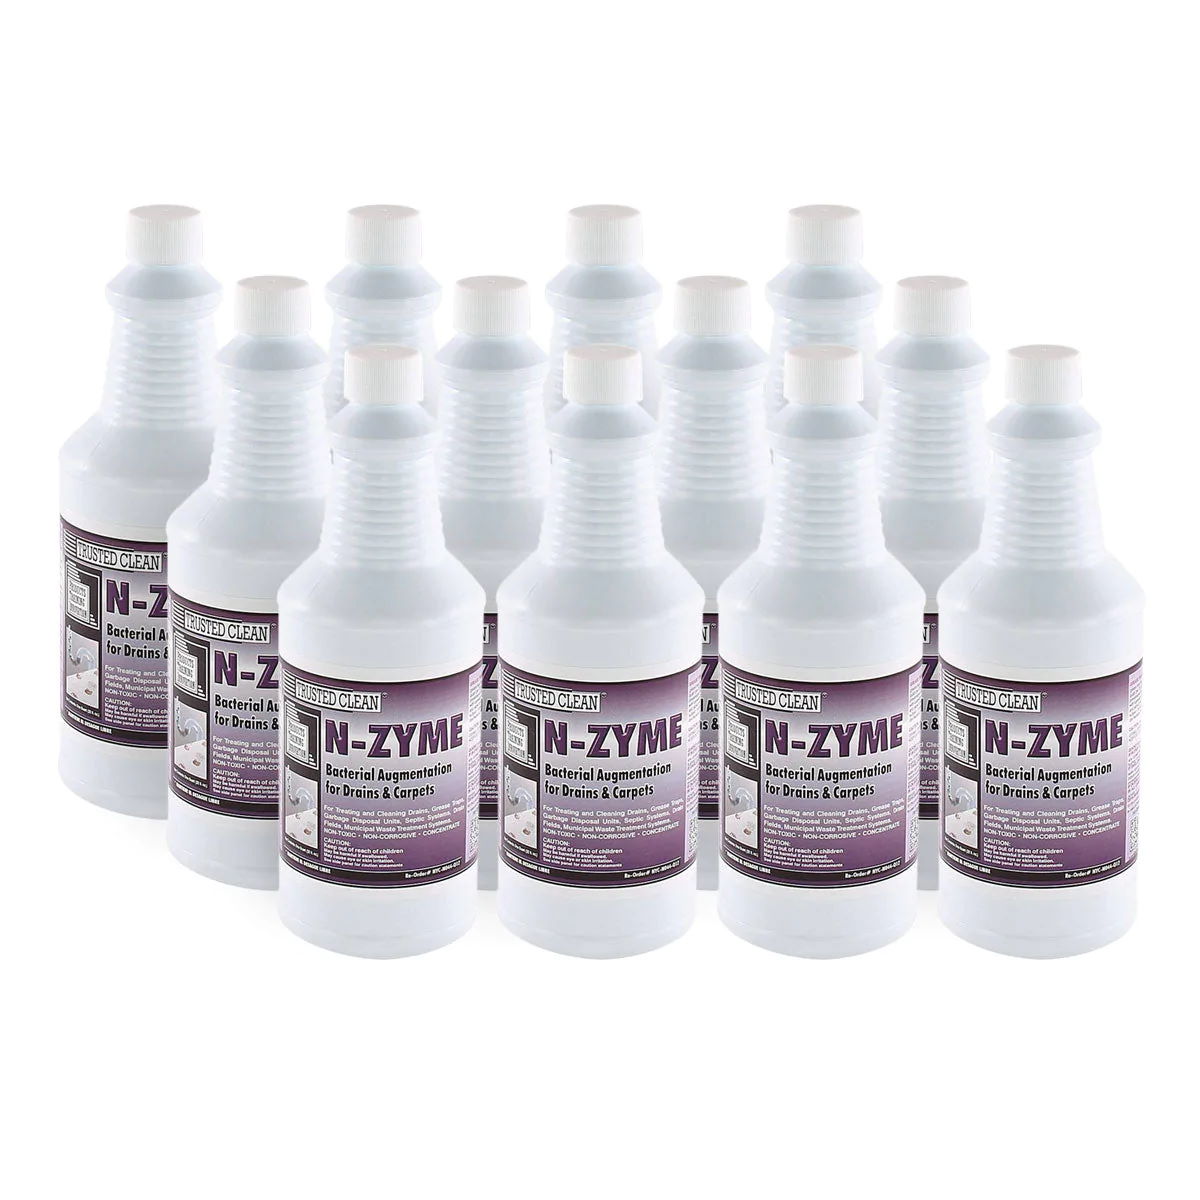 Enzyme Based Pet Stain Removers